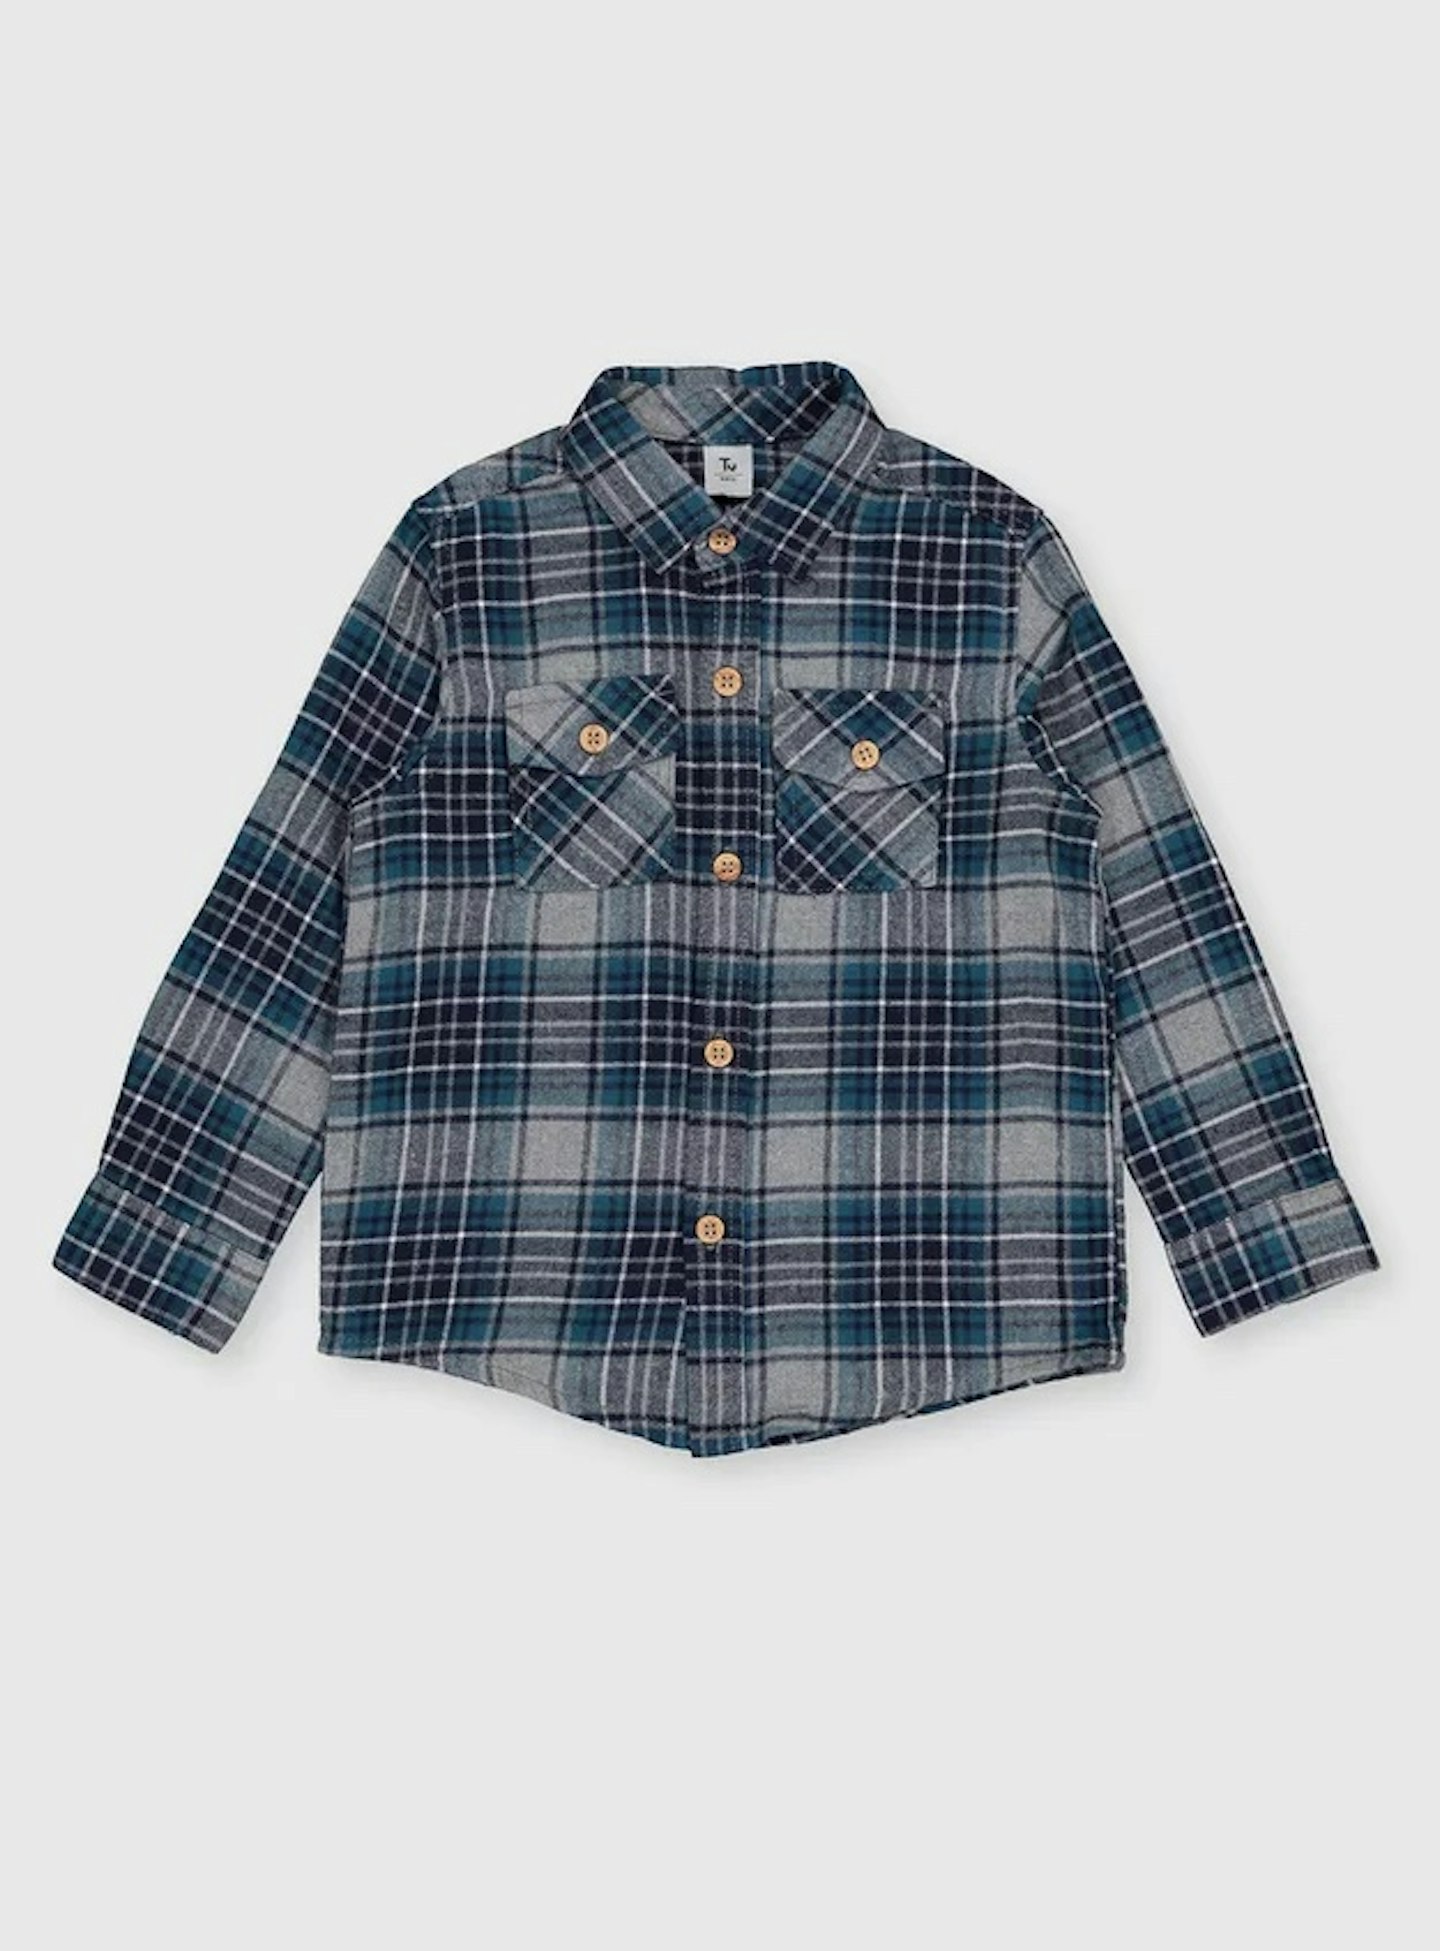 Blue Check Shirt (1-7 Years), From £7.00